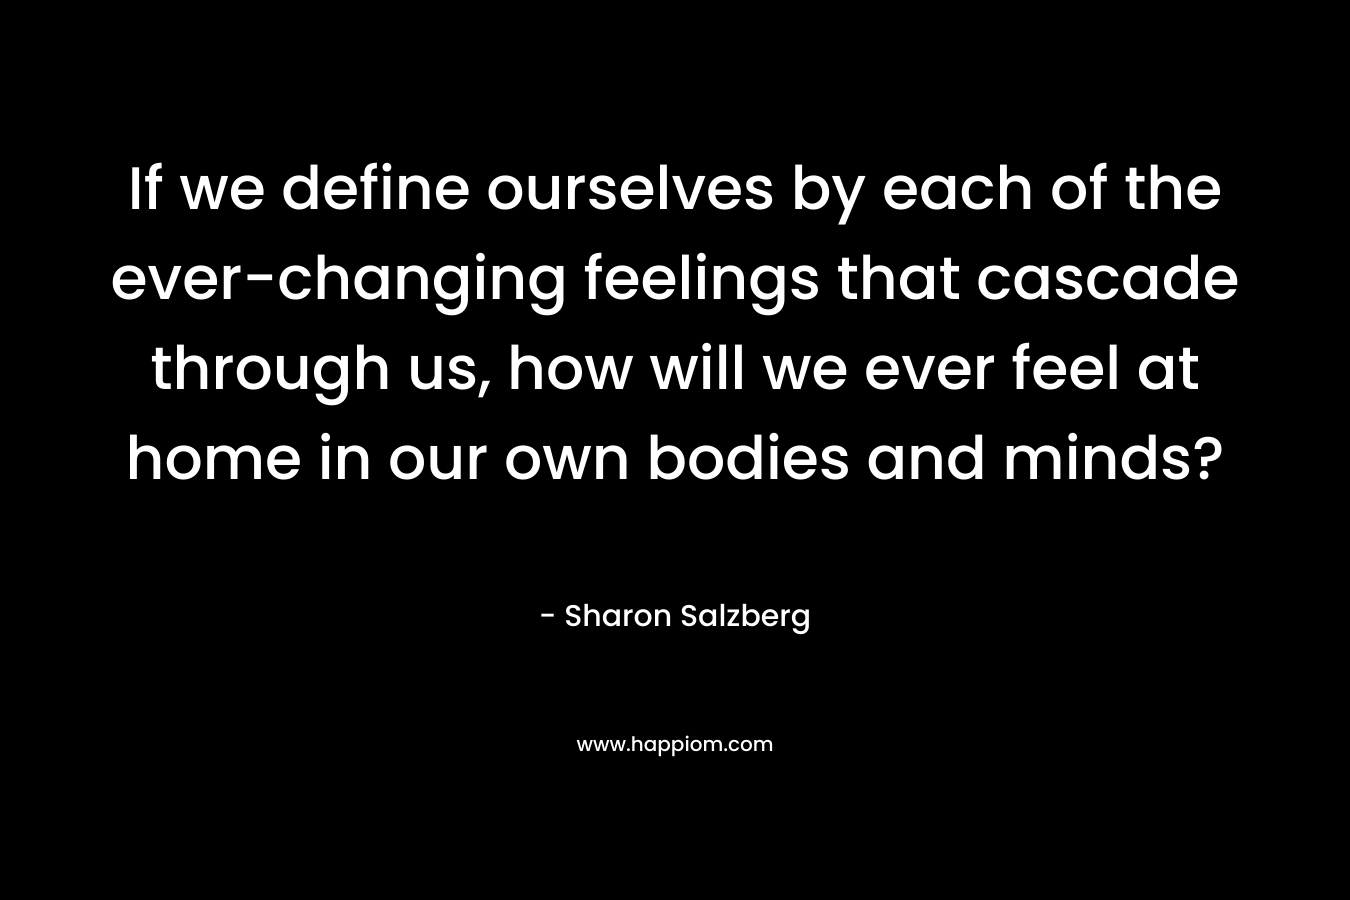 If we define ourselves by each of the ever-changing feelings that cascade through us, how will we ever feel at home in our own bodies and minds?